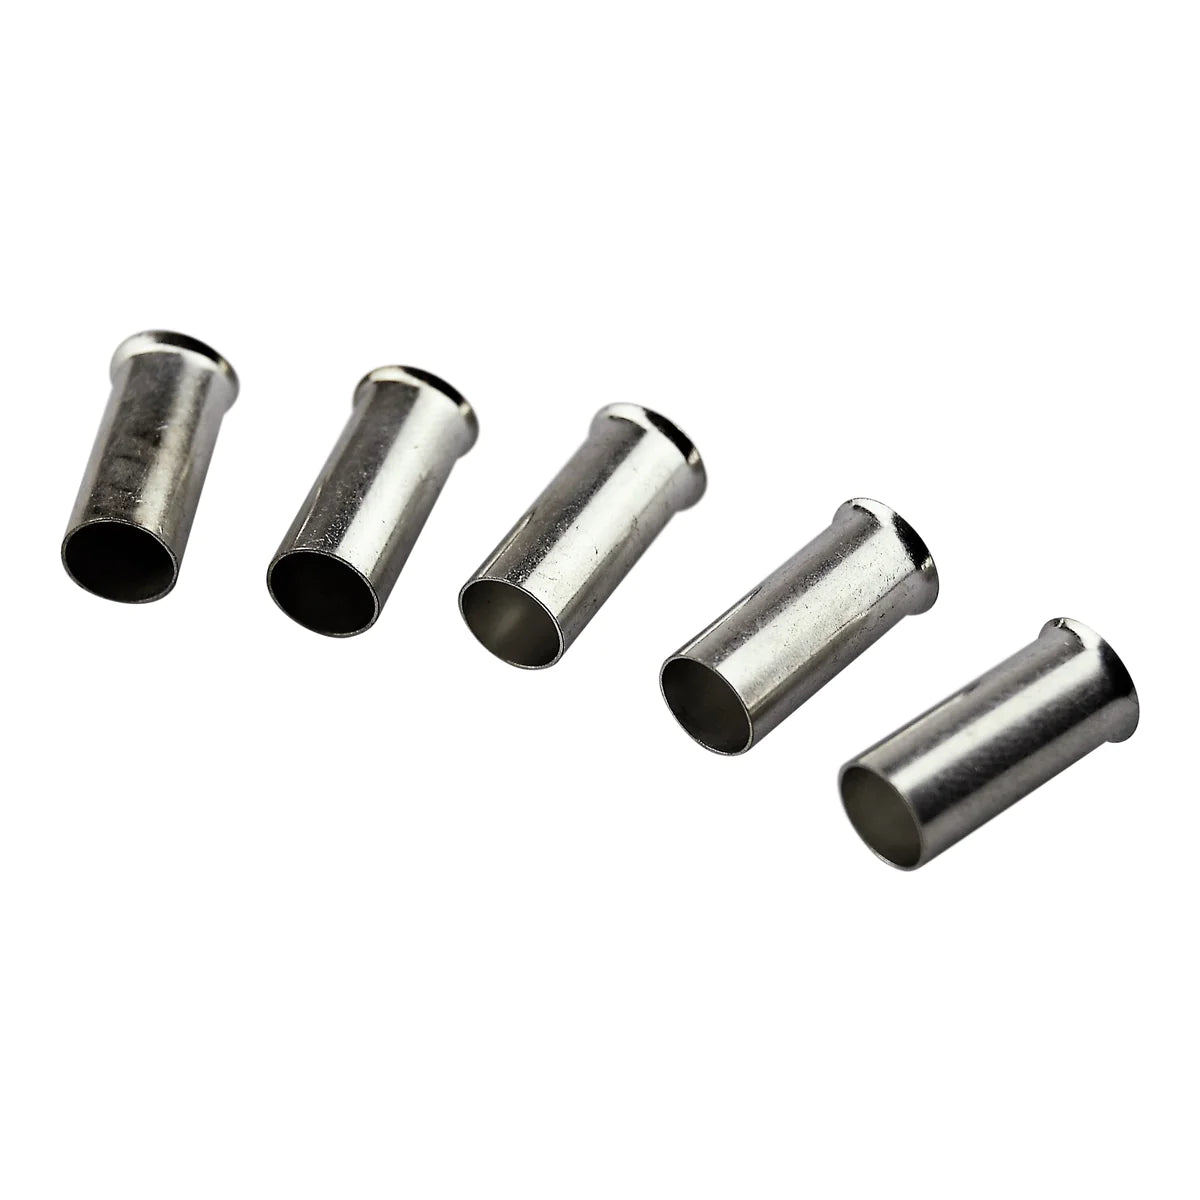 Uninsulated Cord End Terminals for 0.5mm² - 35mm² Cable Size - Pack of 100